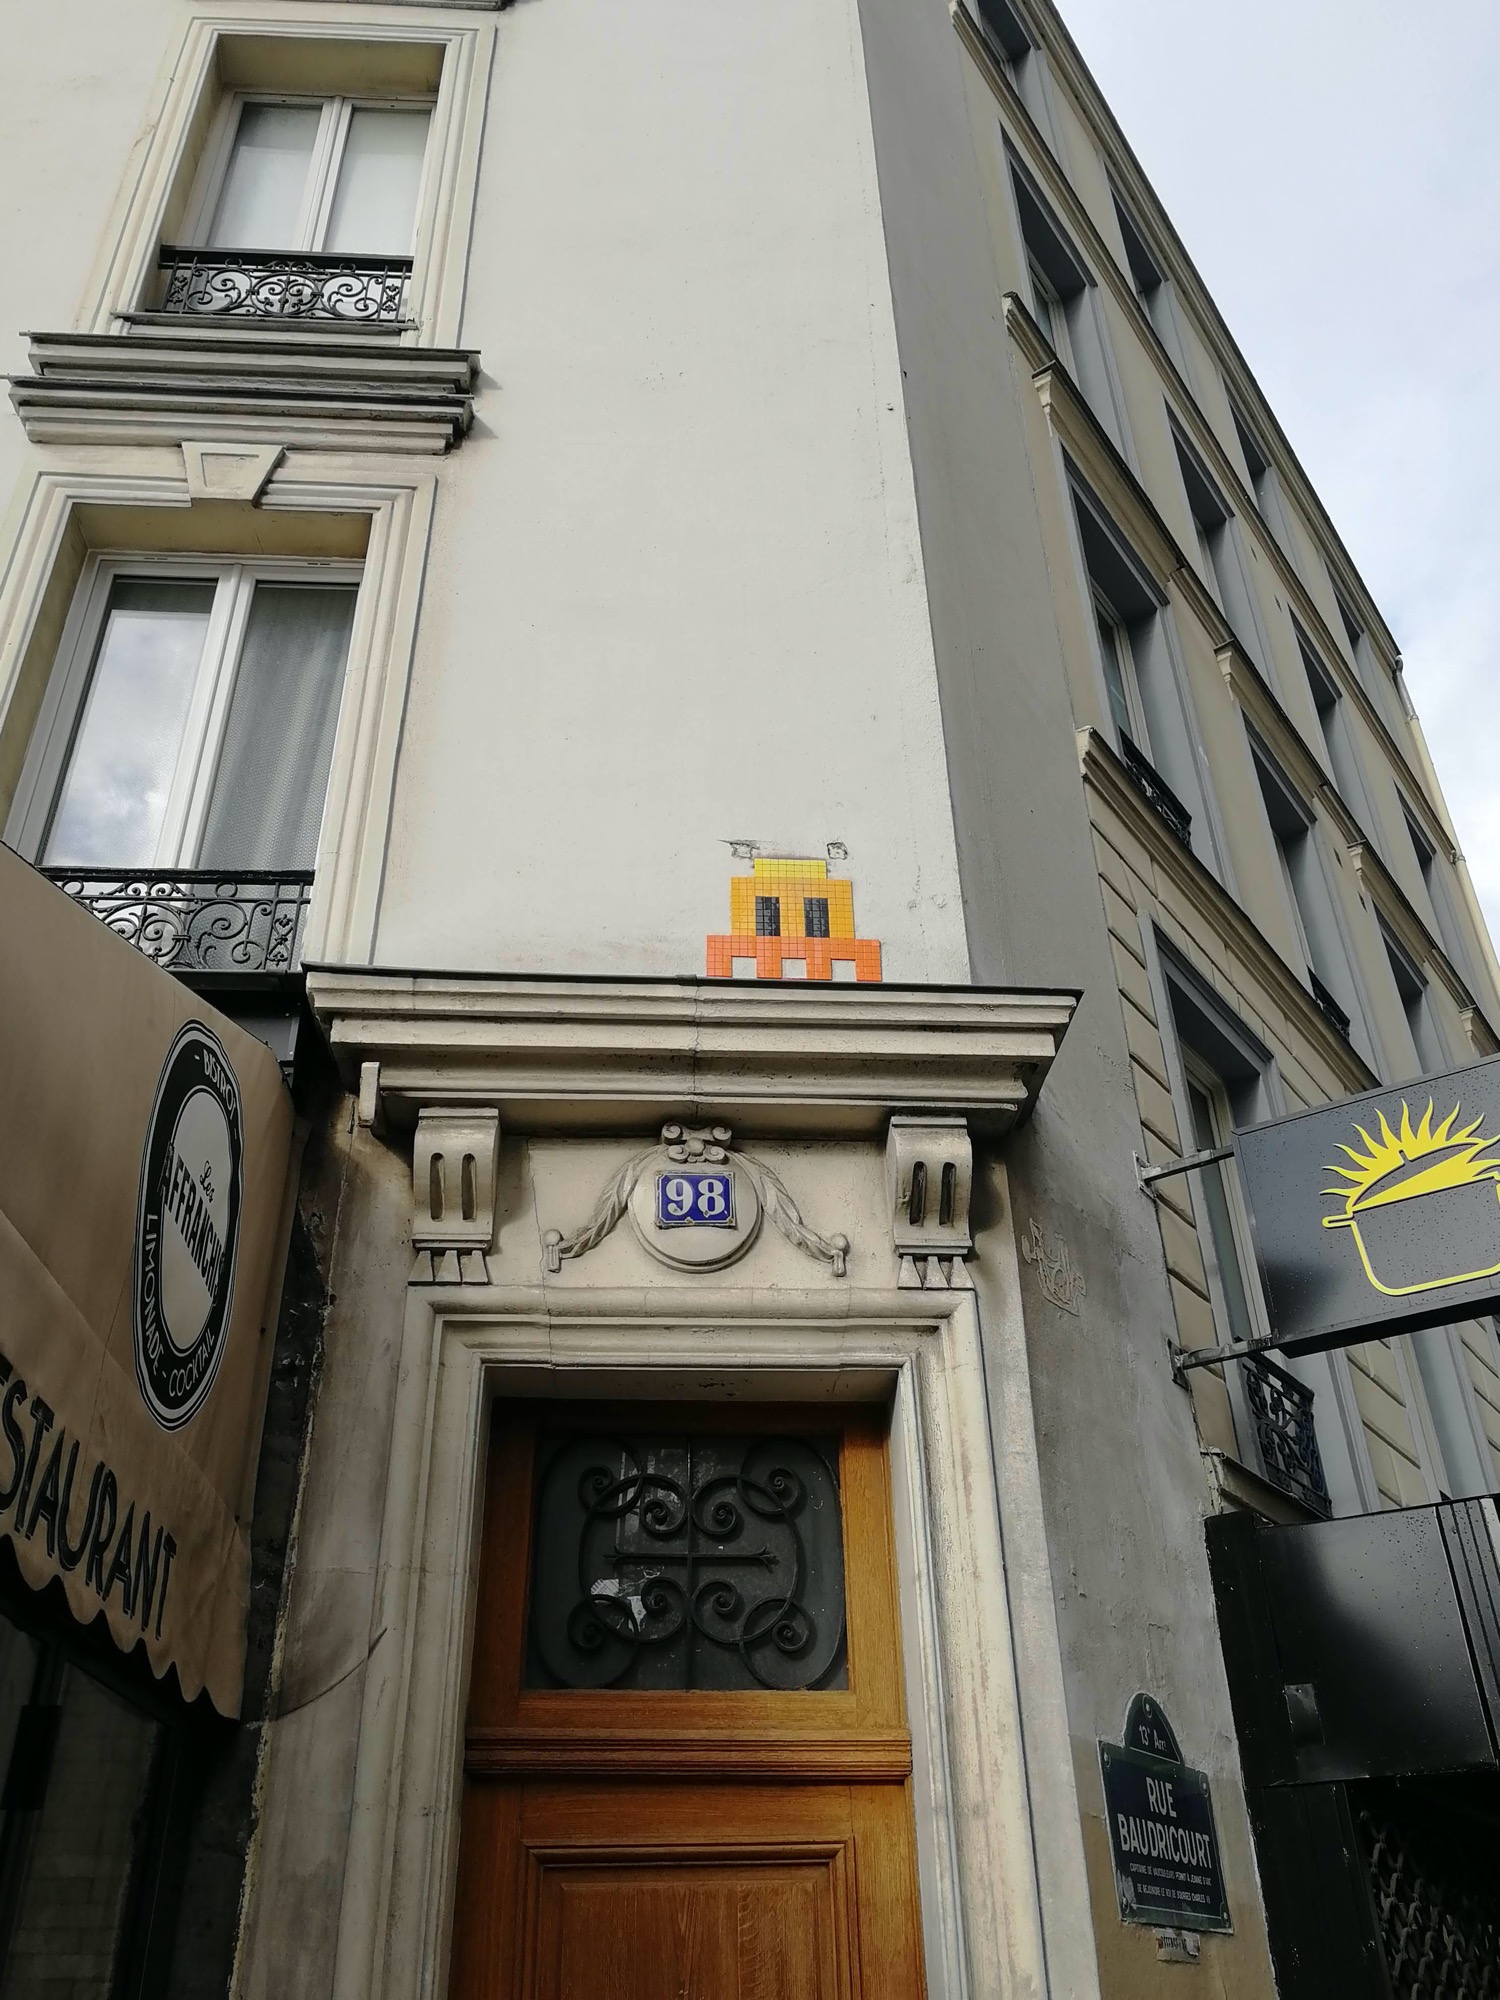 Graffiti 3234  by the artist Invader captured by Rabot in Paris France